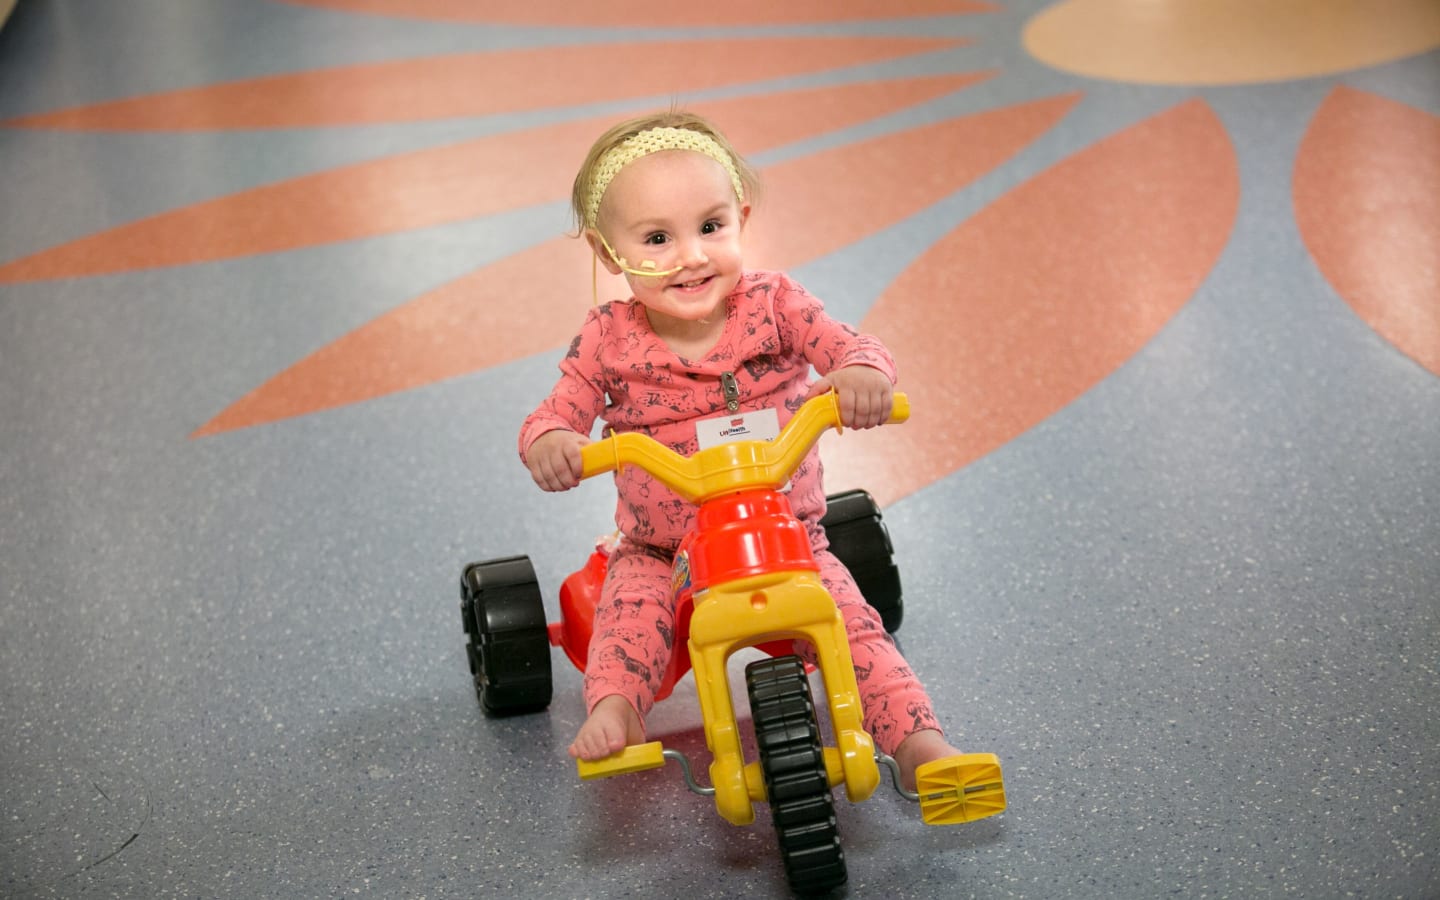 A child riding a tricycle in the hospital while undergoing cancer treatment